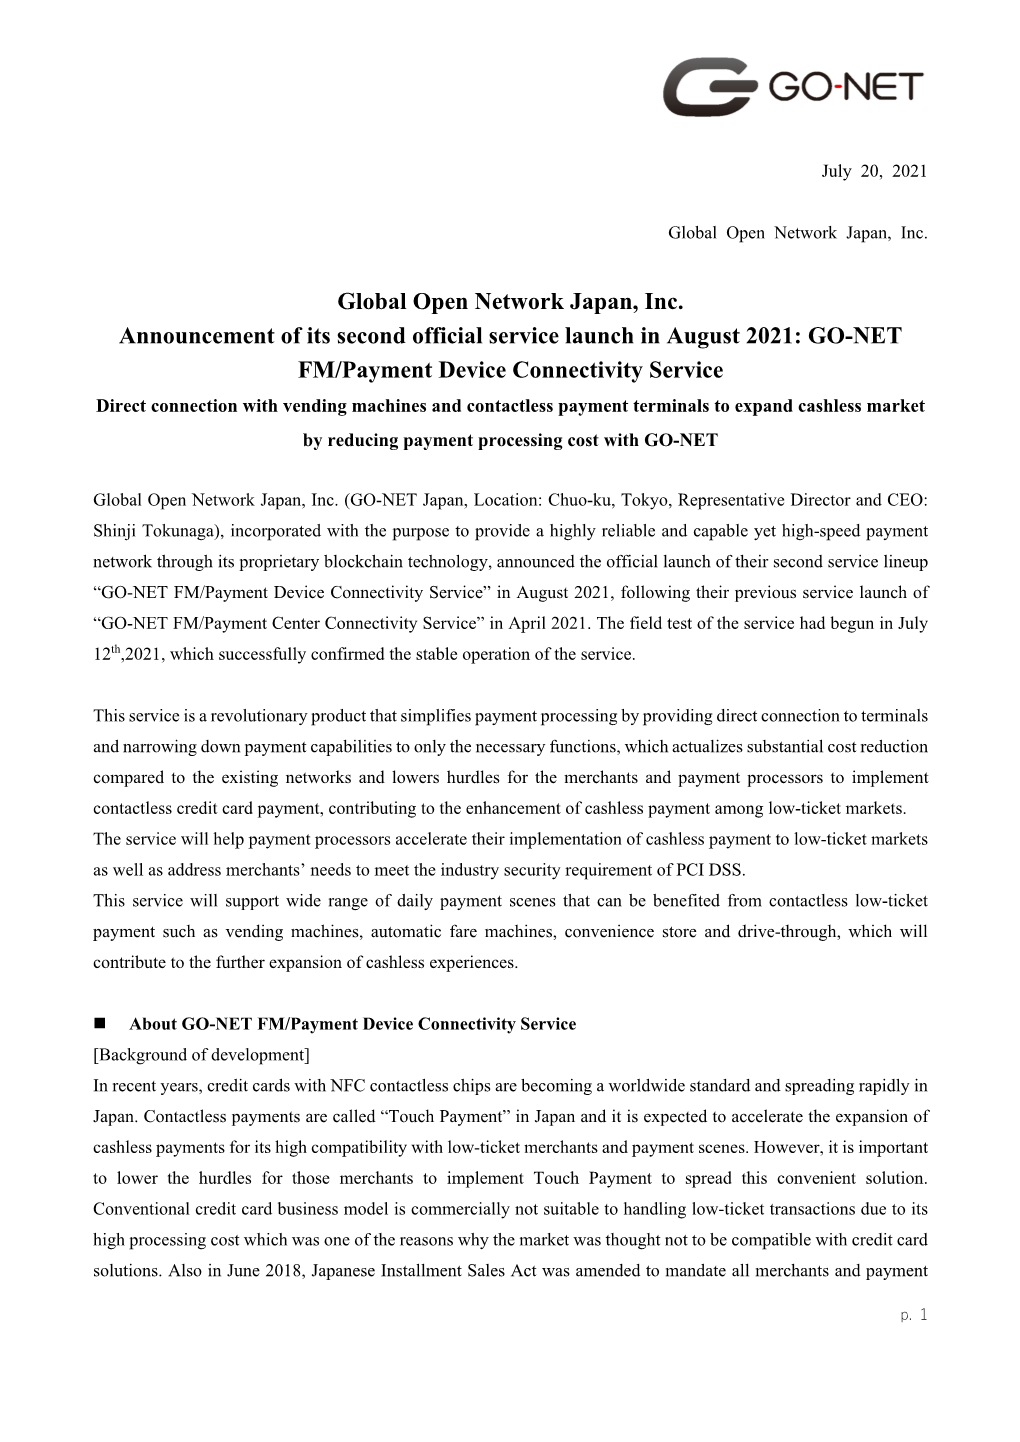 Global Open Network Japan, Inc. Announcement of Its Second Official